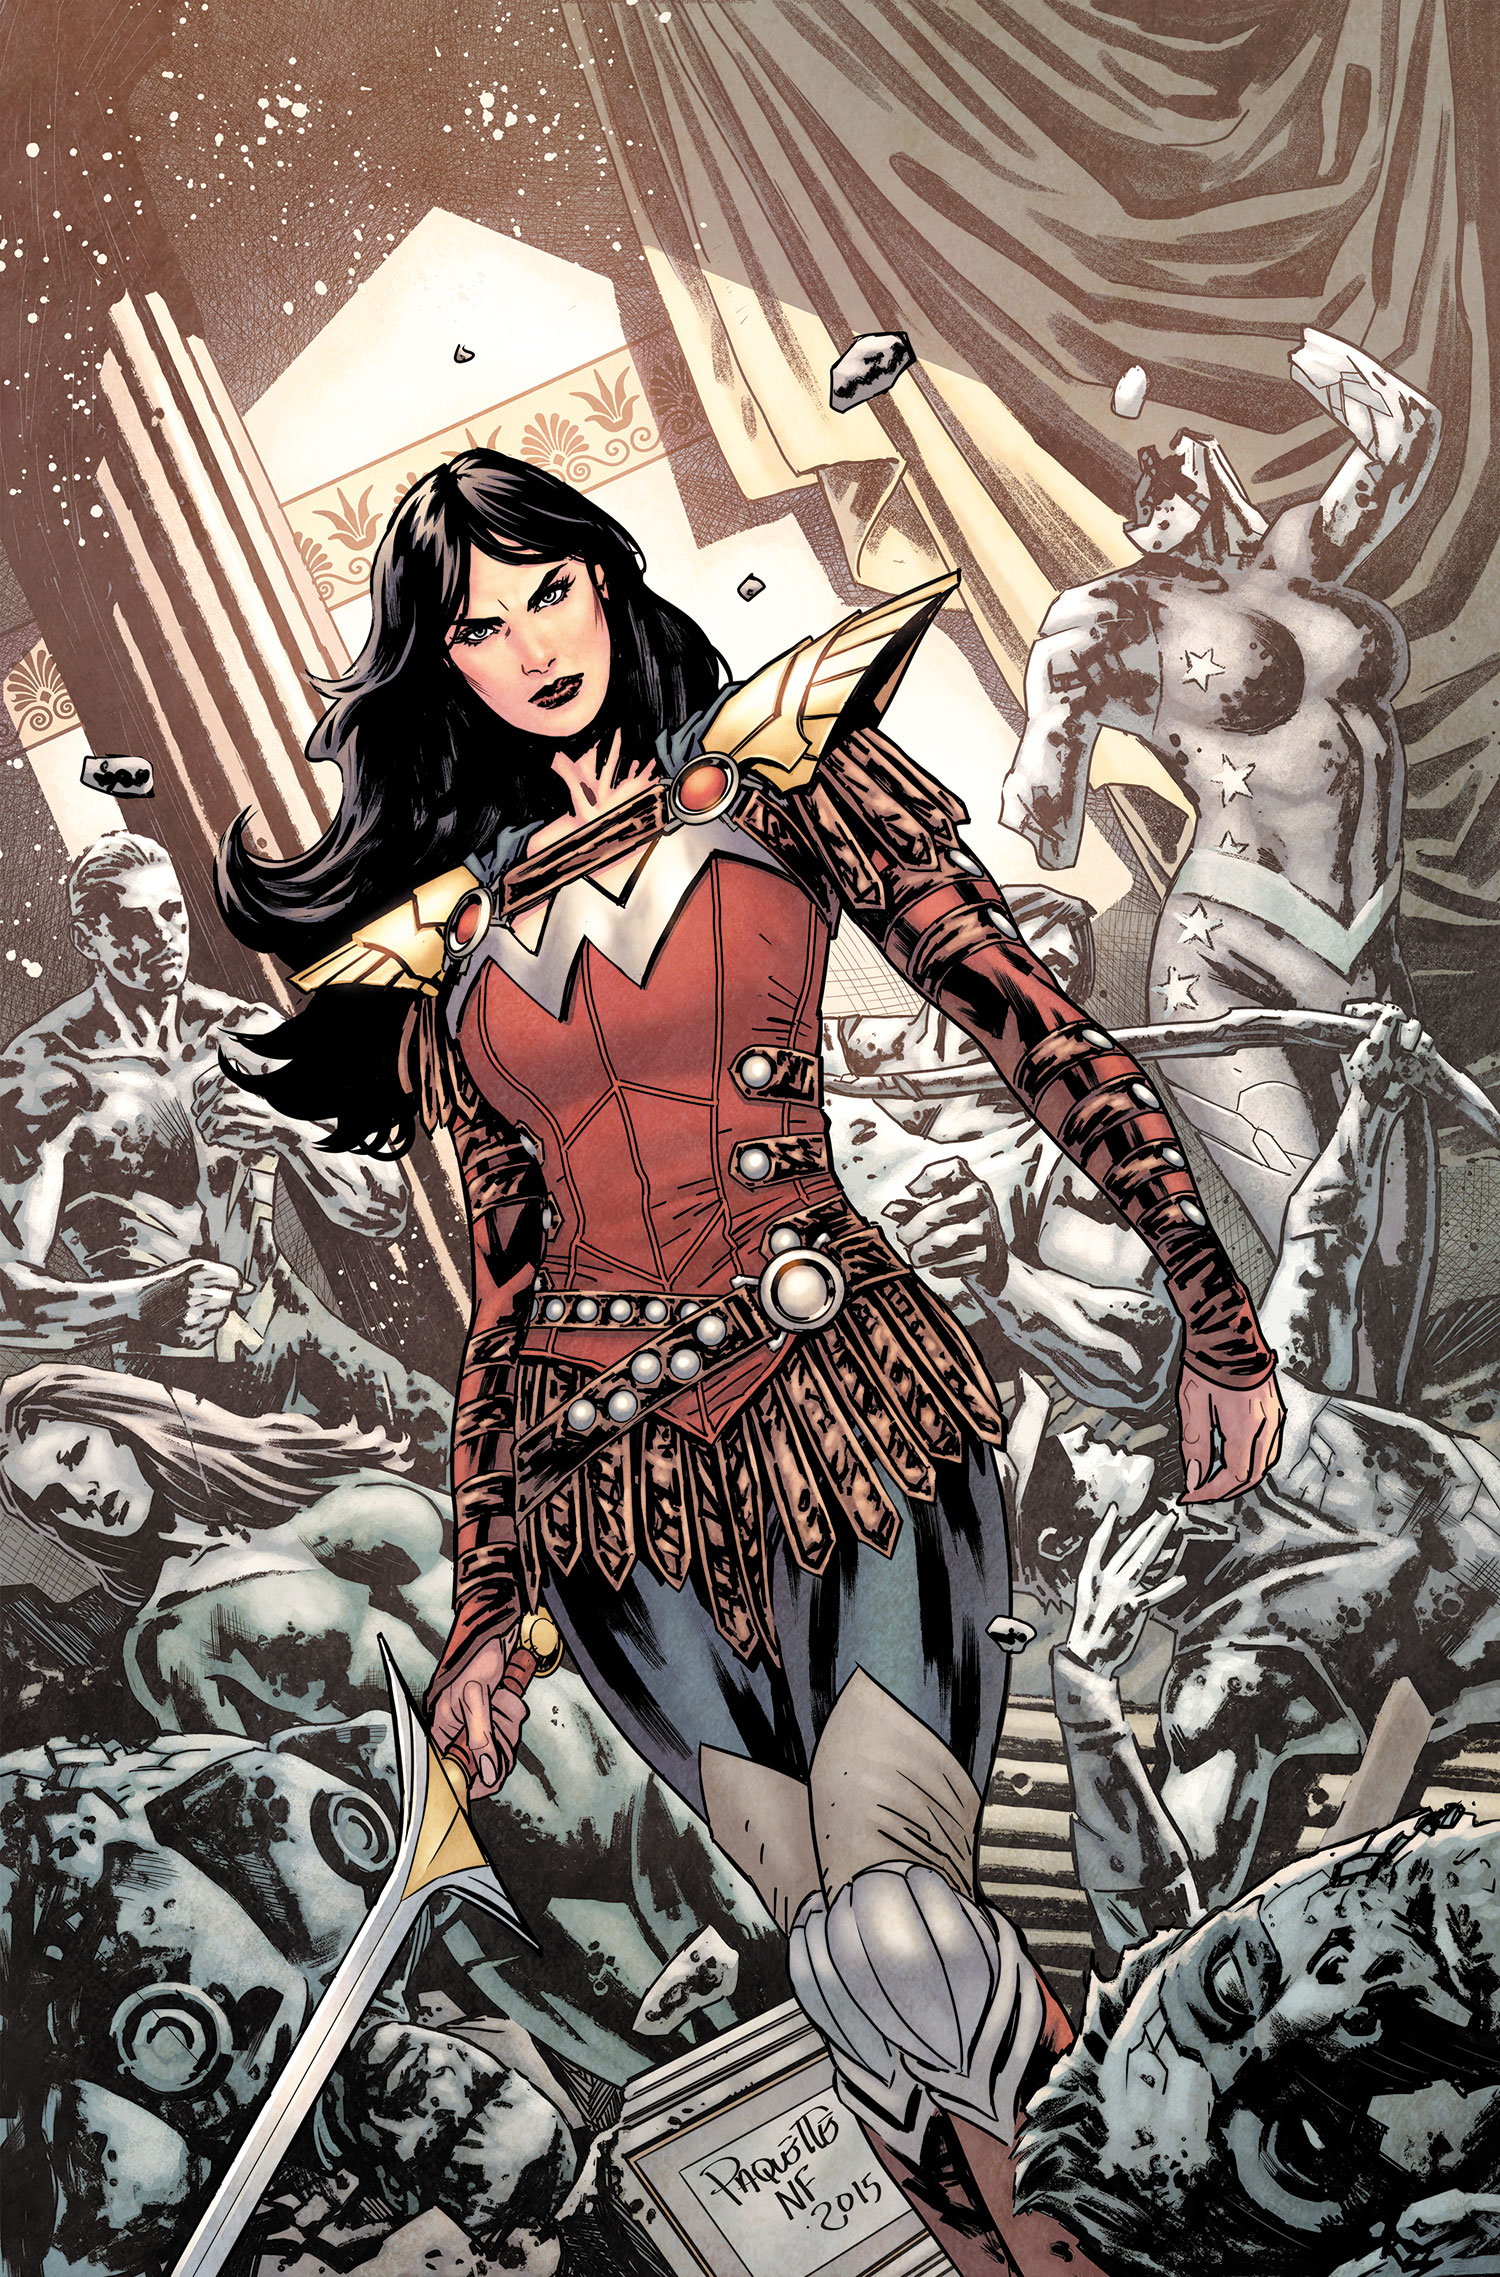 Titans: Donna Troy's Wonder Girl Costume Revealed In New Photo